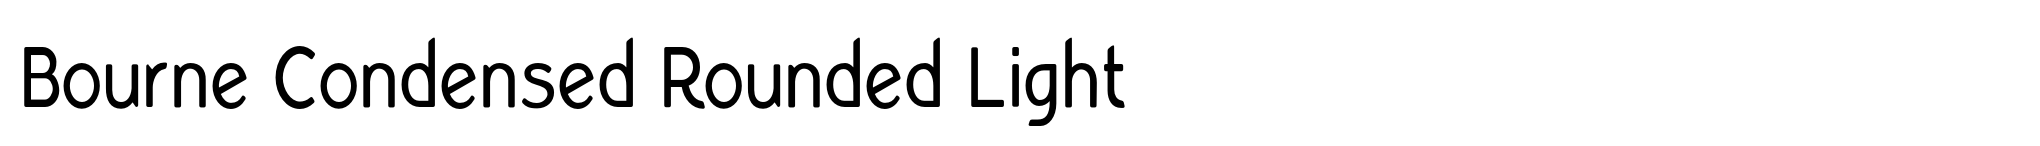 Bourne Condensed Rounded Light image